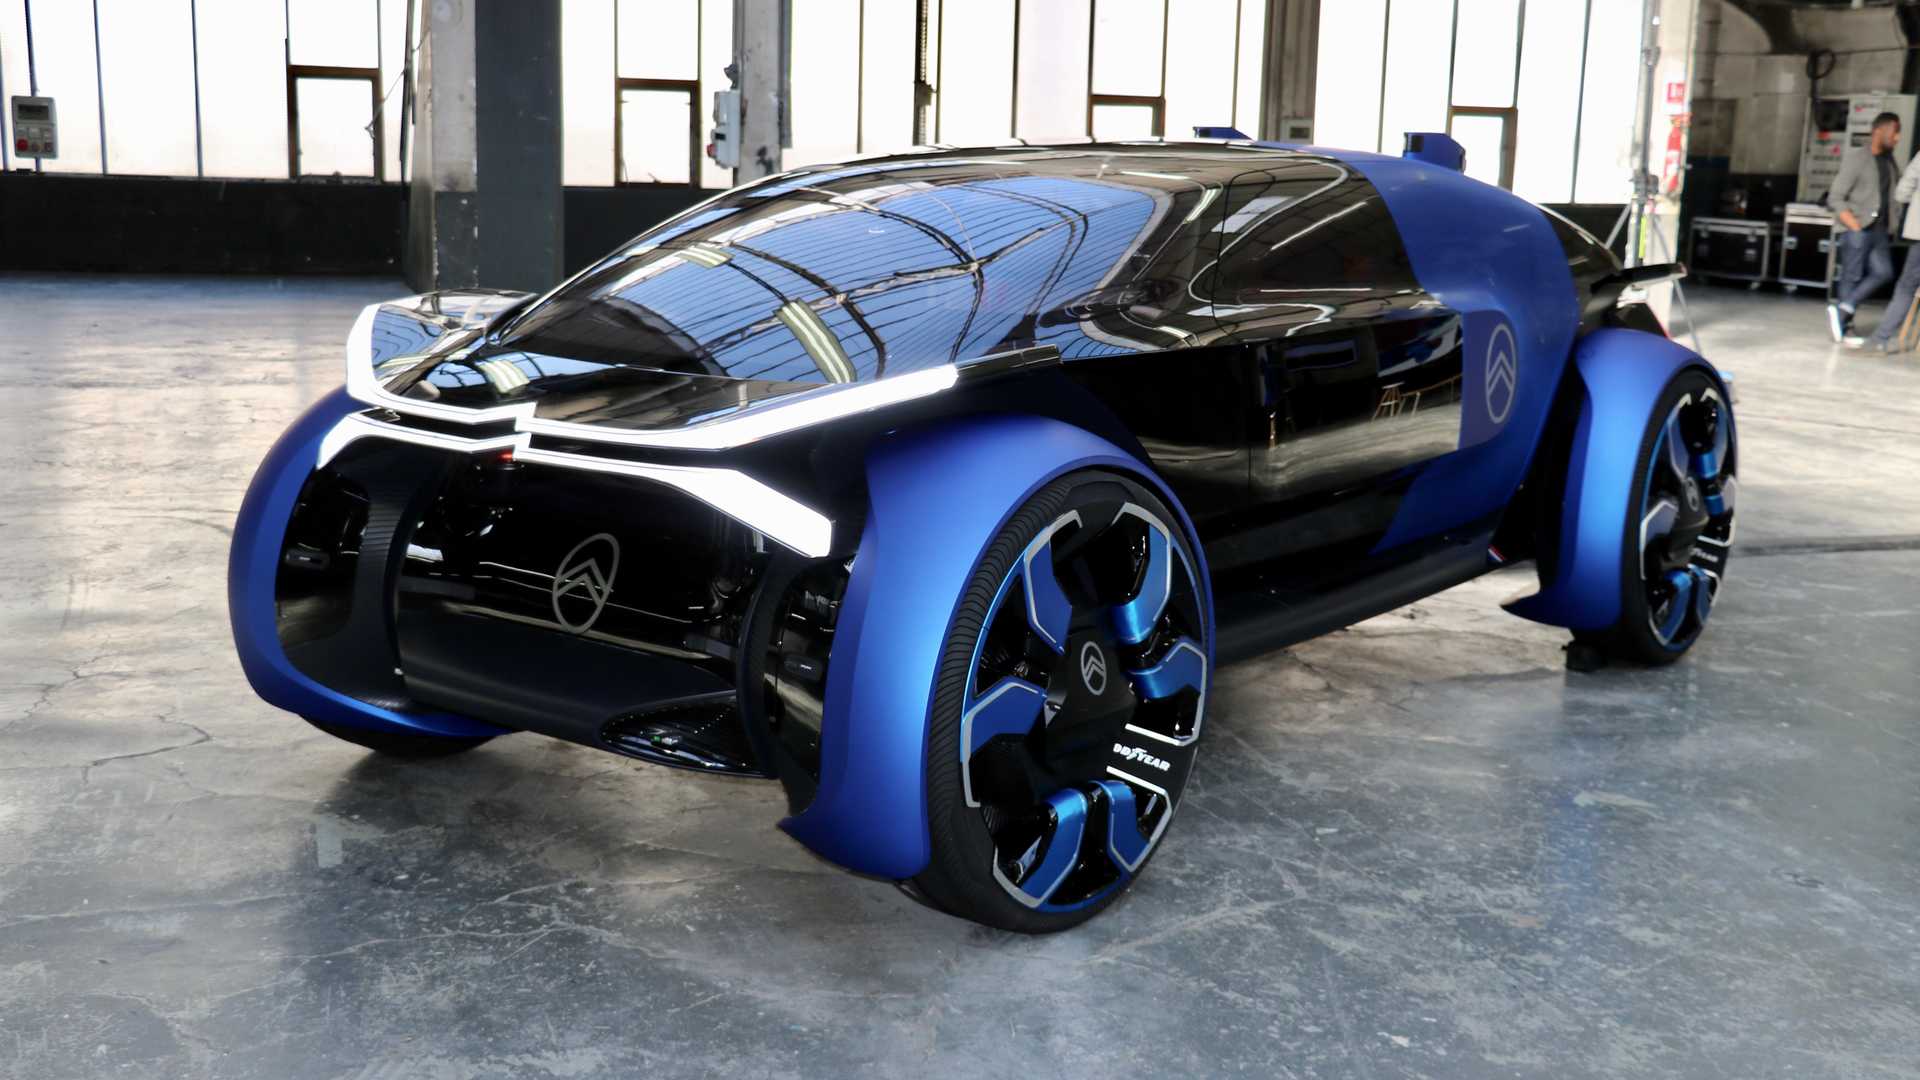 The 19_19 Autonomous FullElectric Concept Car Inspired By Aerospace